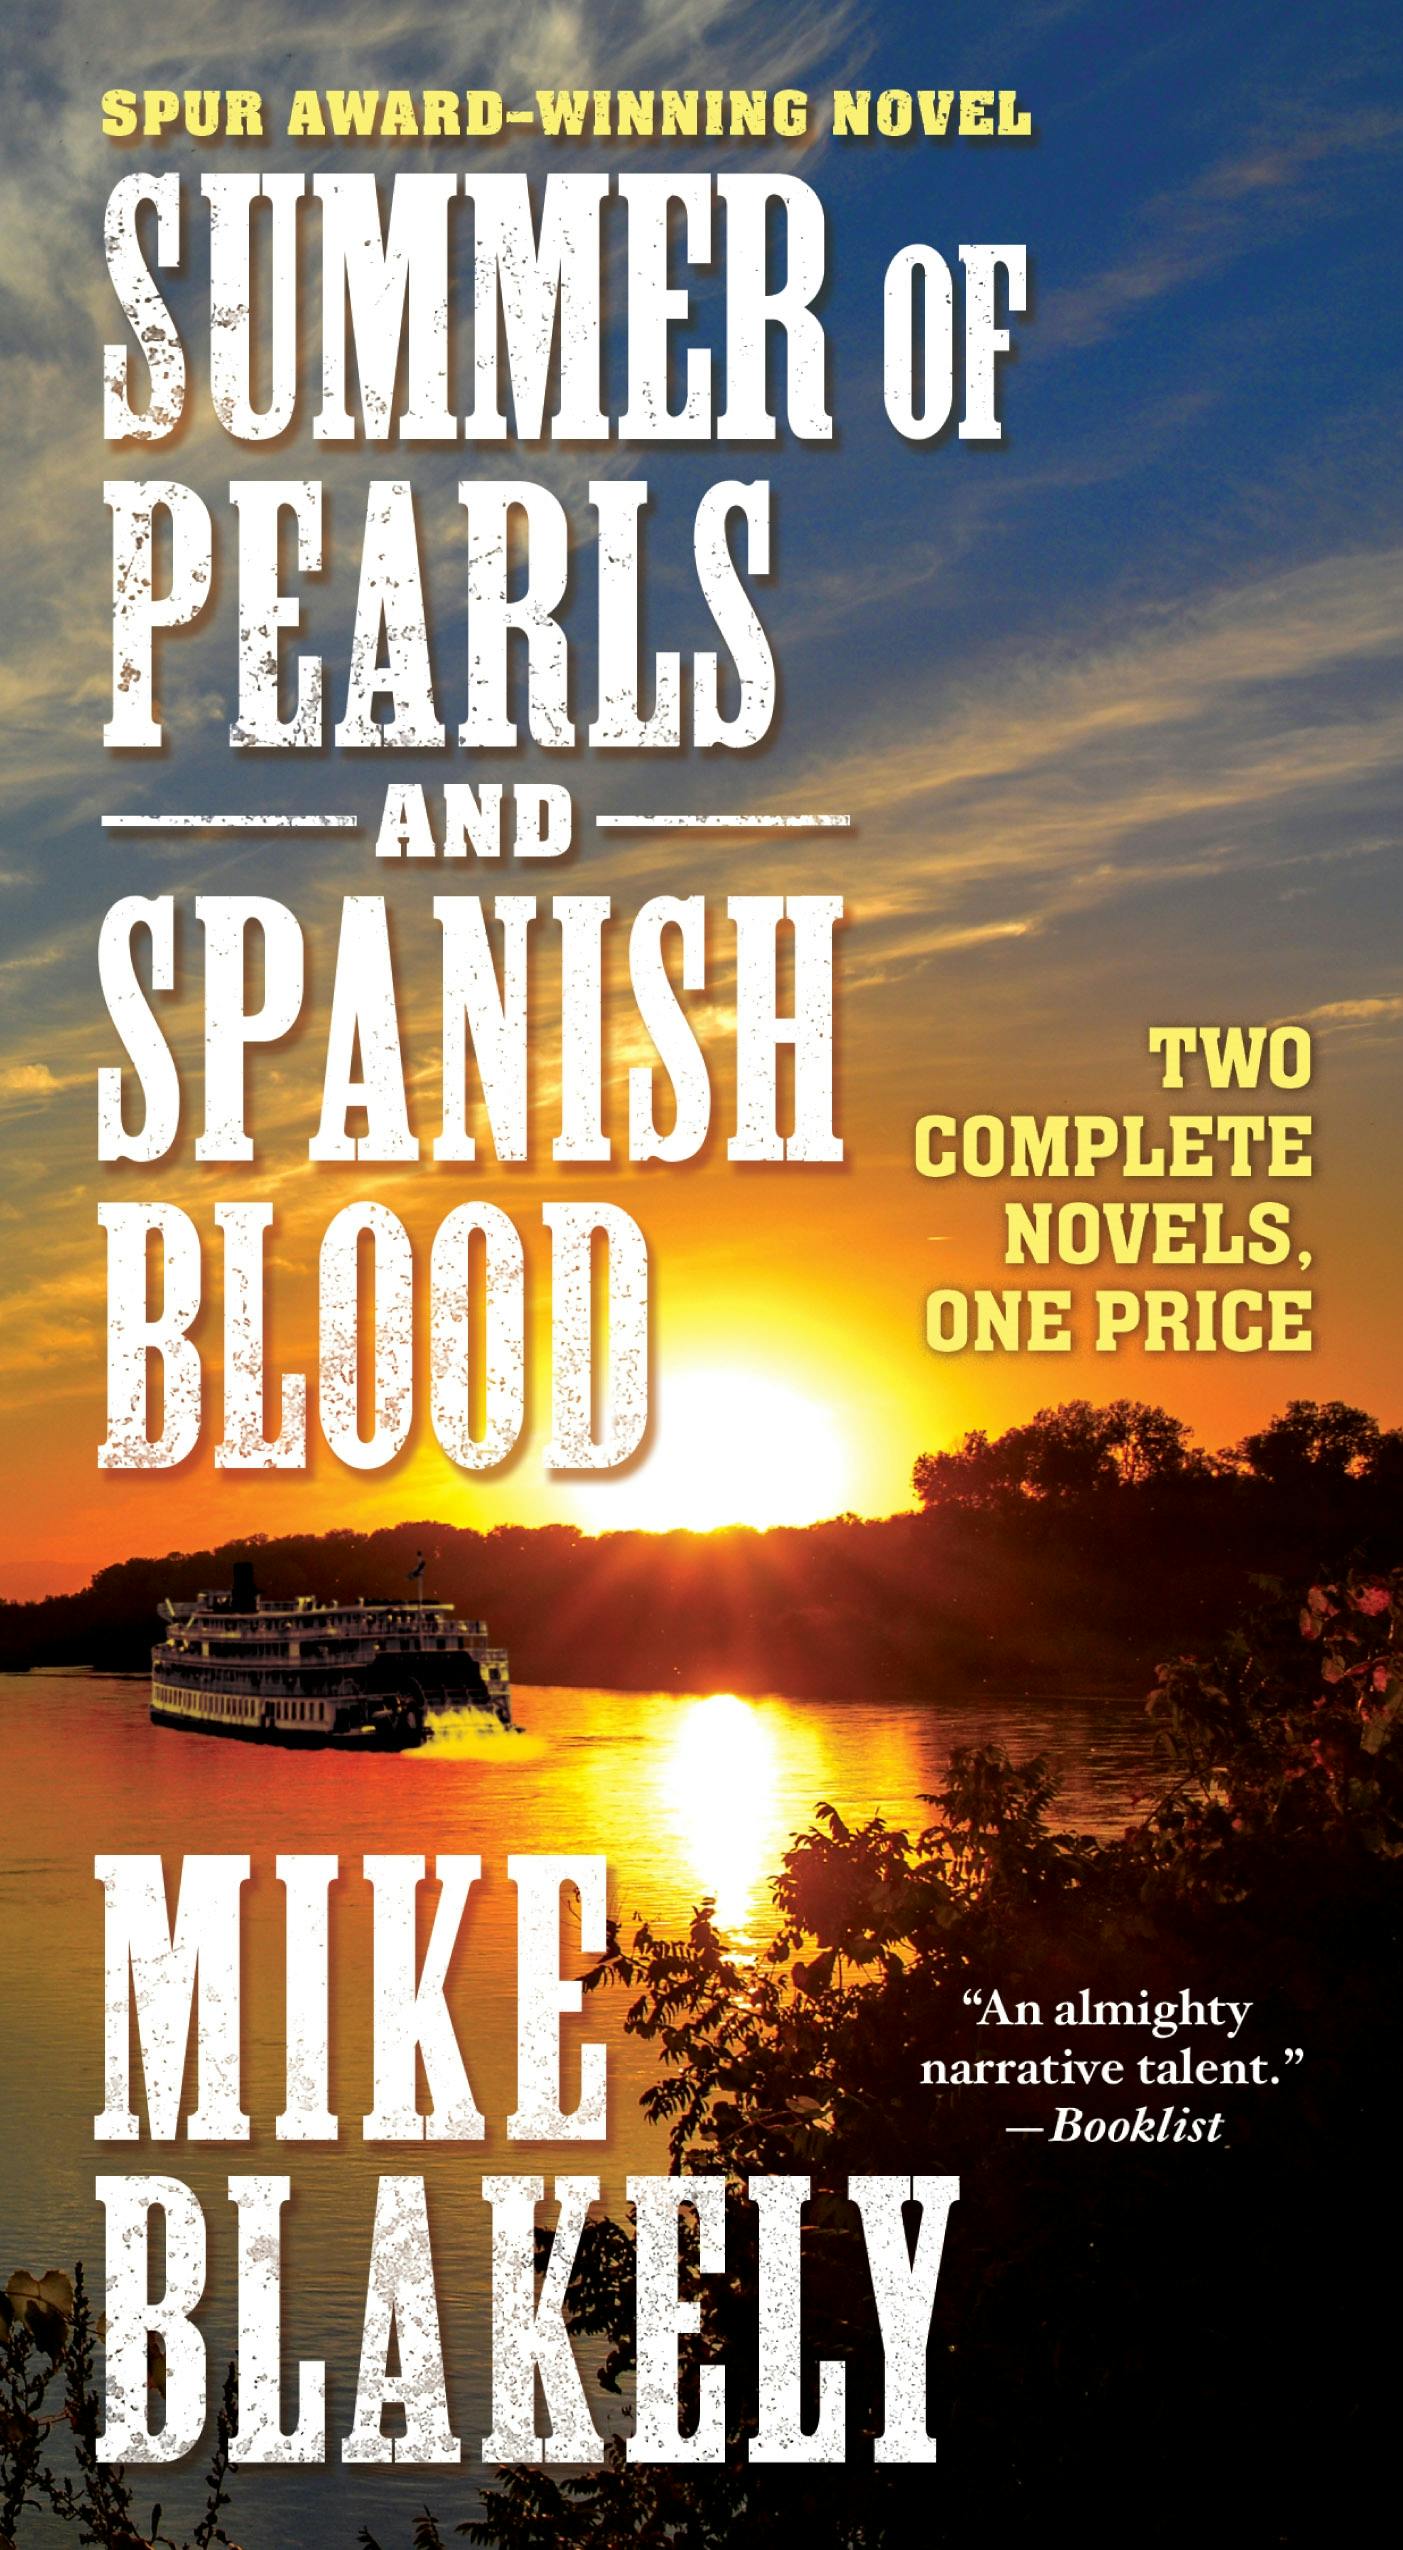 Cover for the book titled as: Summer of Pearls and Spanish Blood